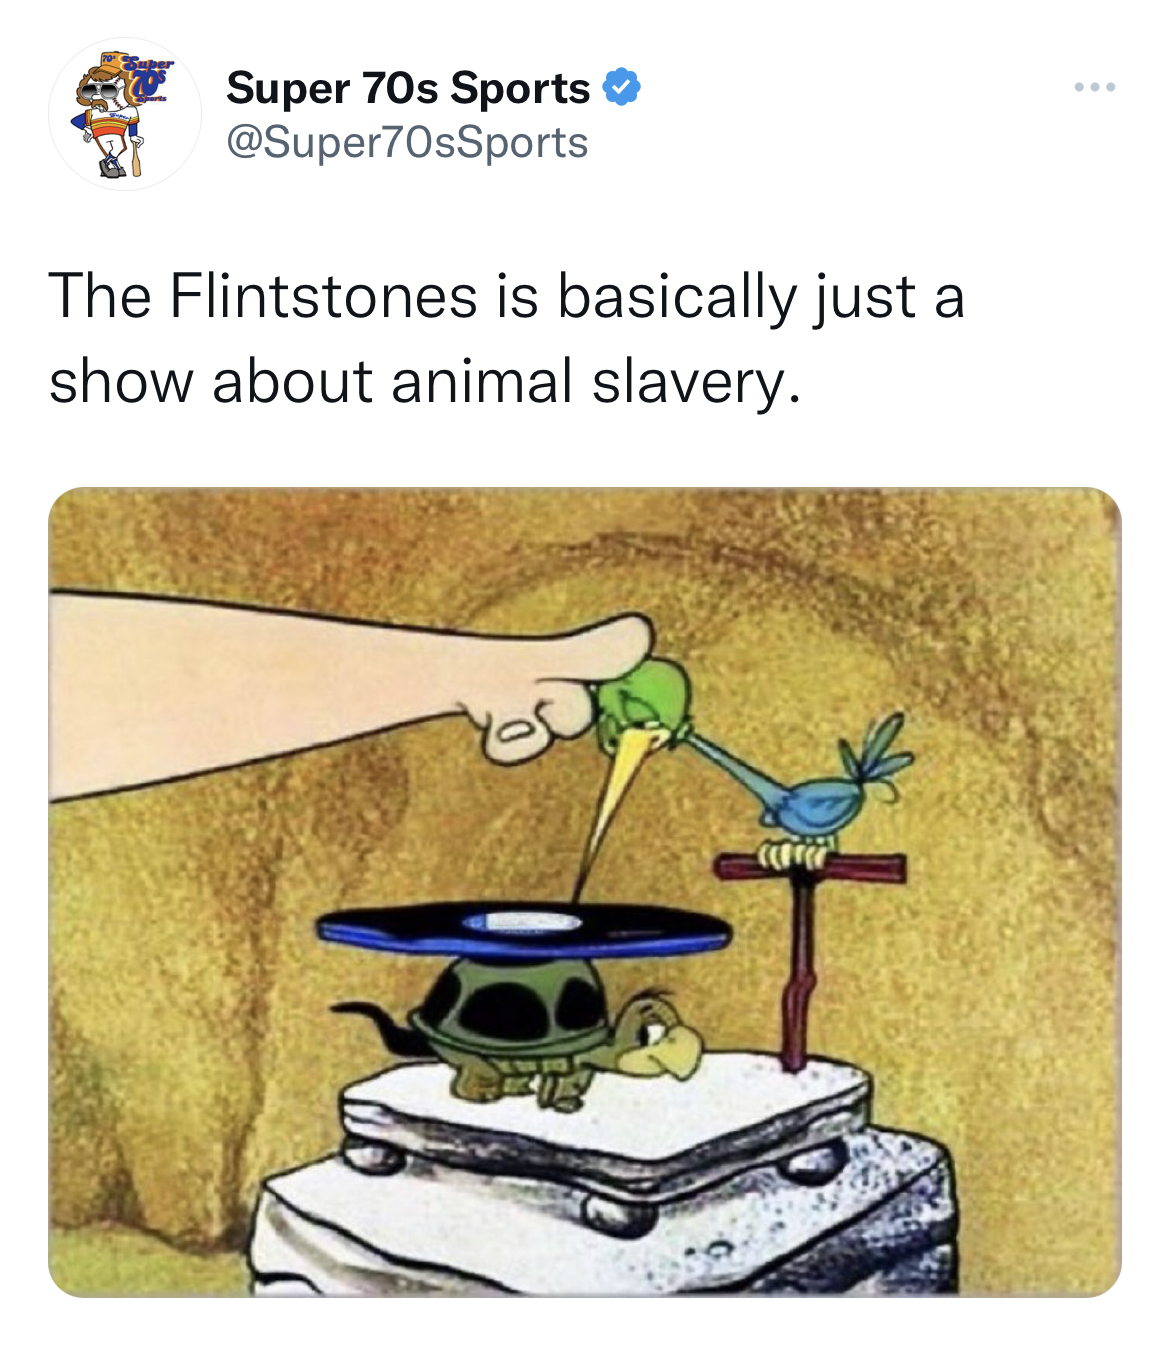 tweets dunking on celebs - memes about ol school songs - Super 70s Sports The Flintstones is basically just a show about animal slavery. per